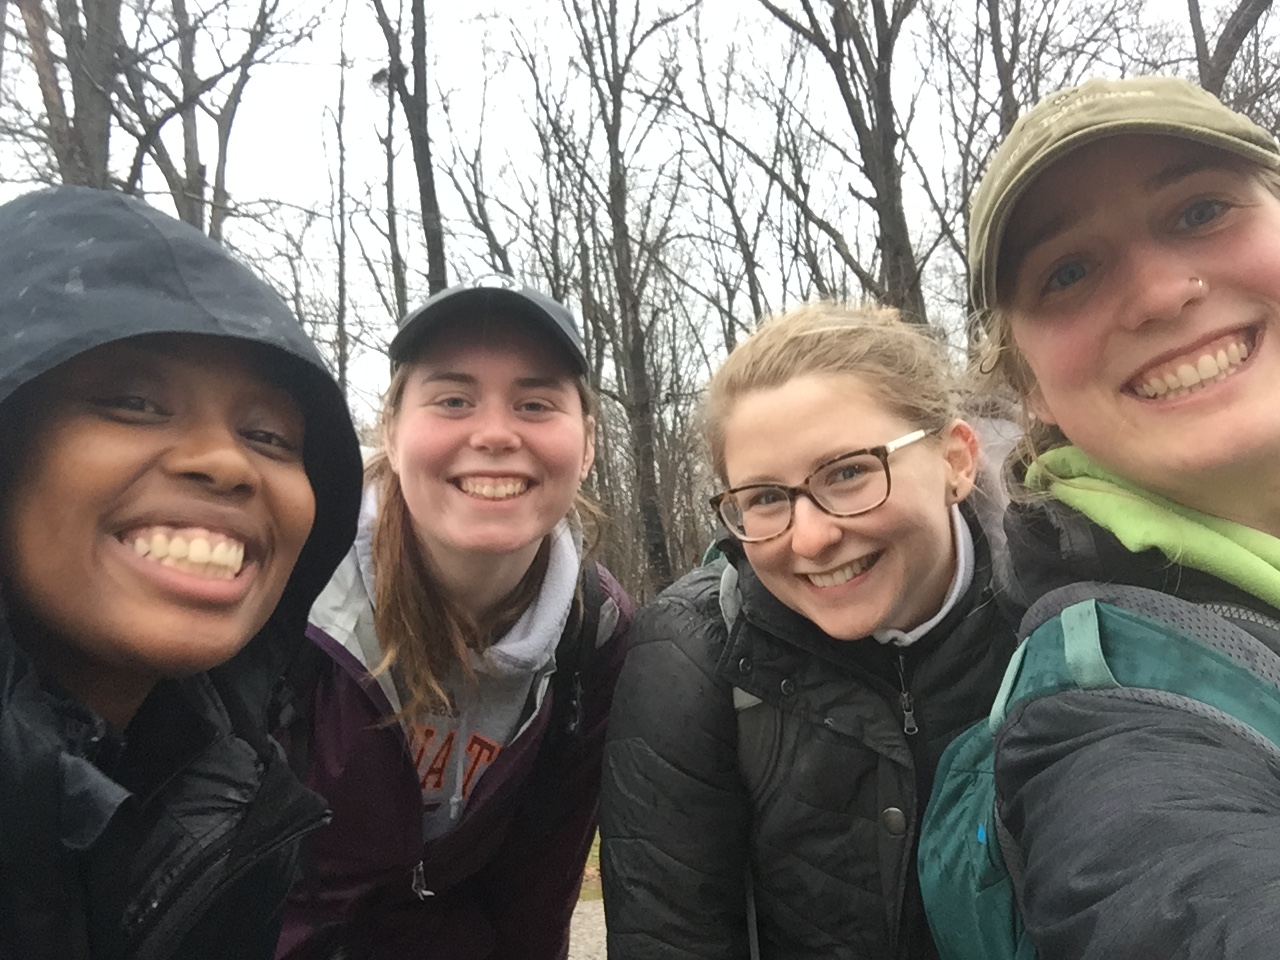 This photo shows the faces and upper torsos of four young women, one African American and three Caucasian, dressed for cold weather and smiling at the camera. In the background are leafless trees.